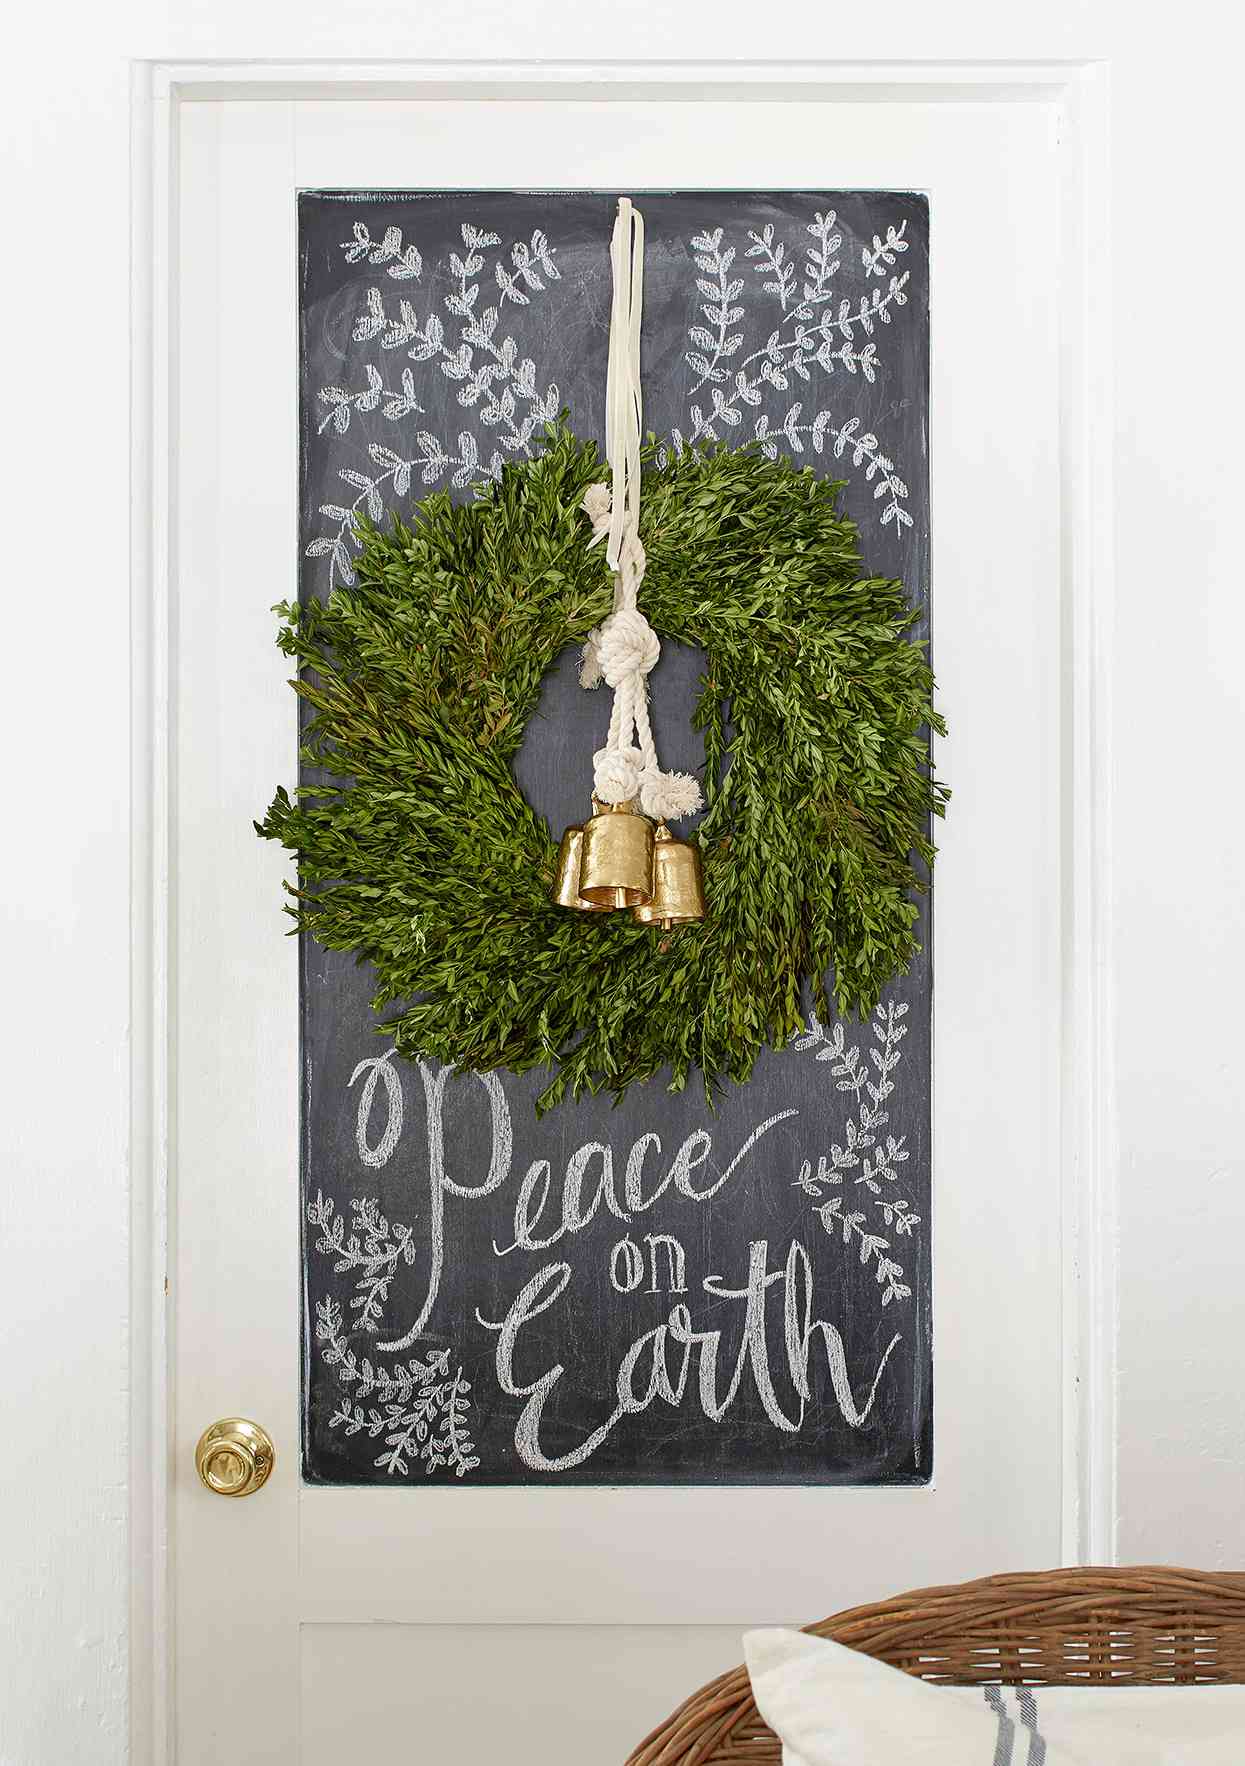 chalkboard-painted door inset with writing, hanging wreath and bells